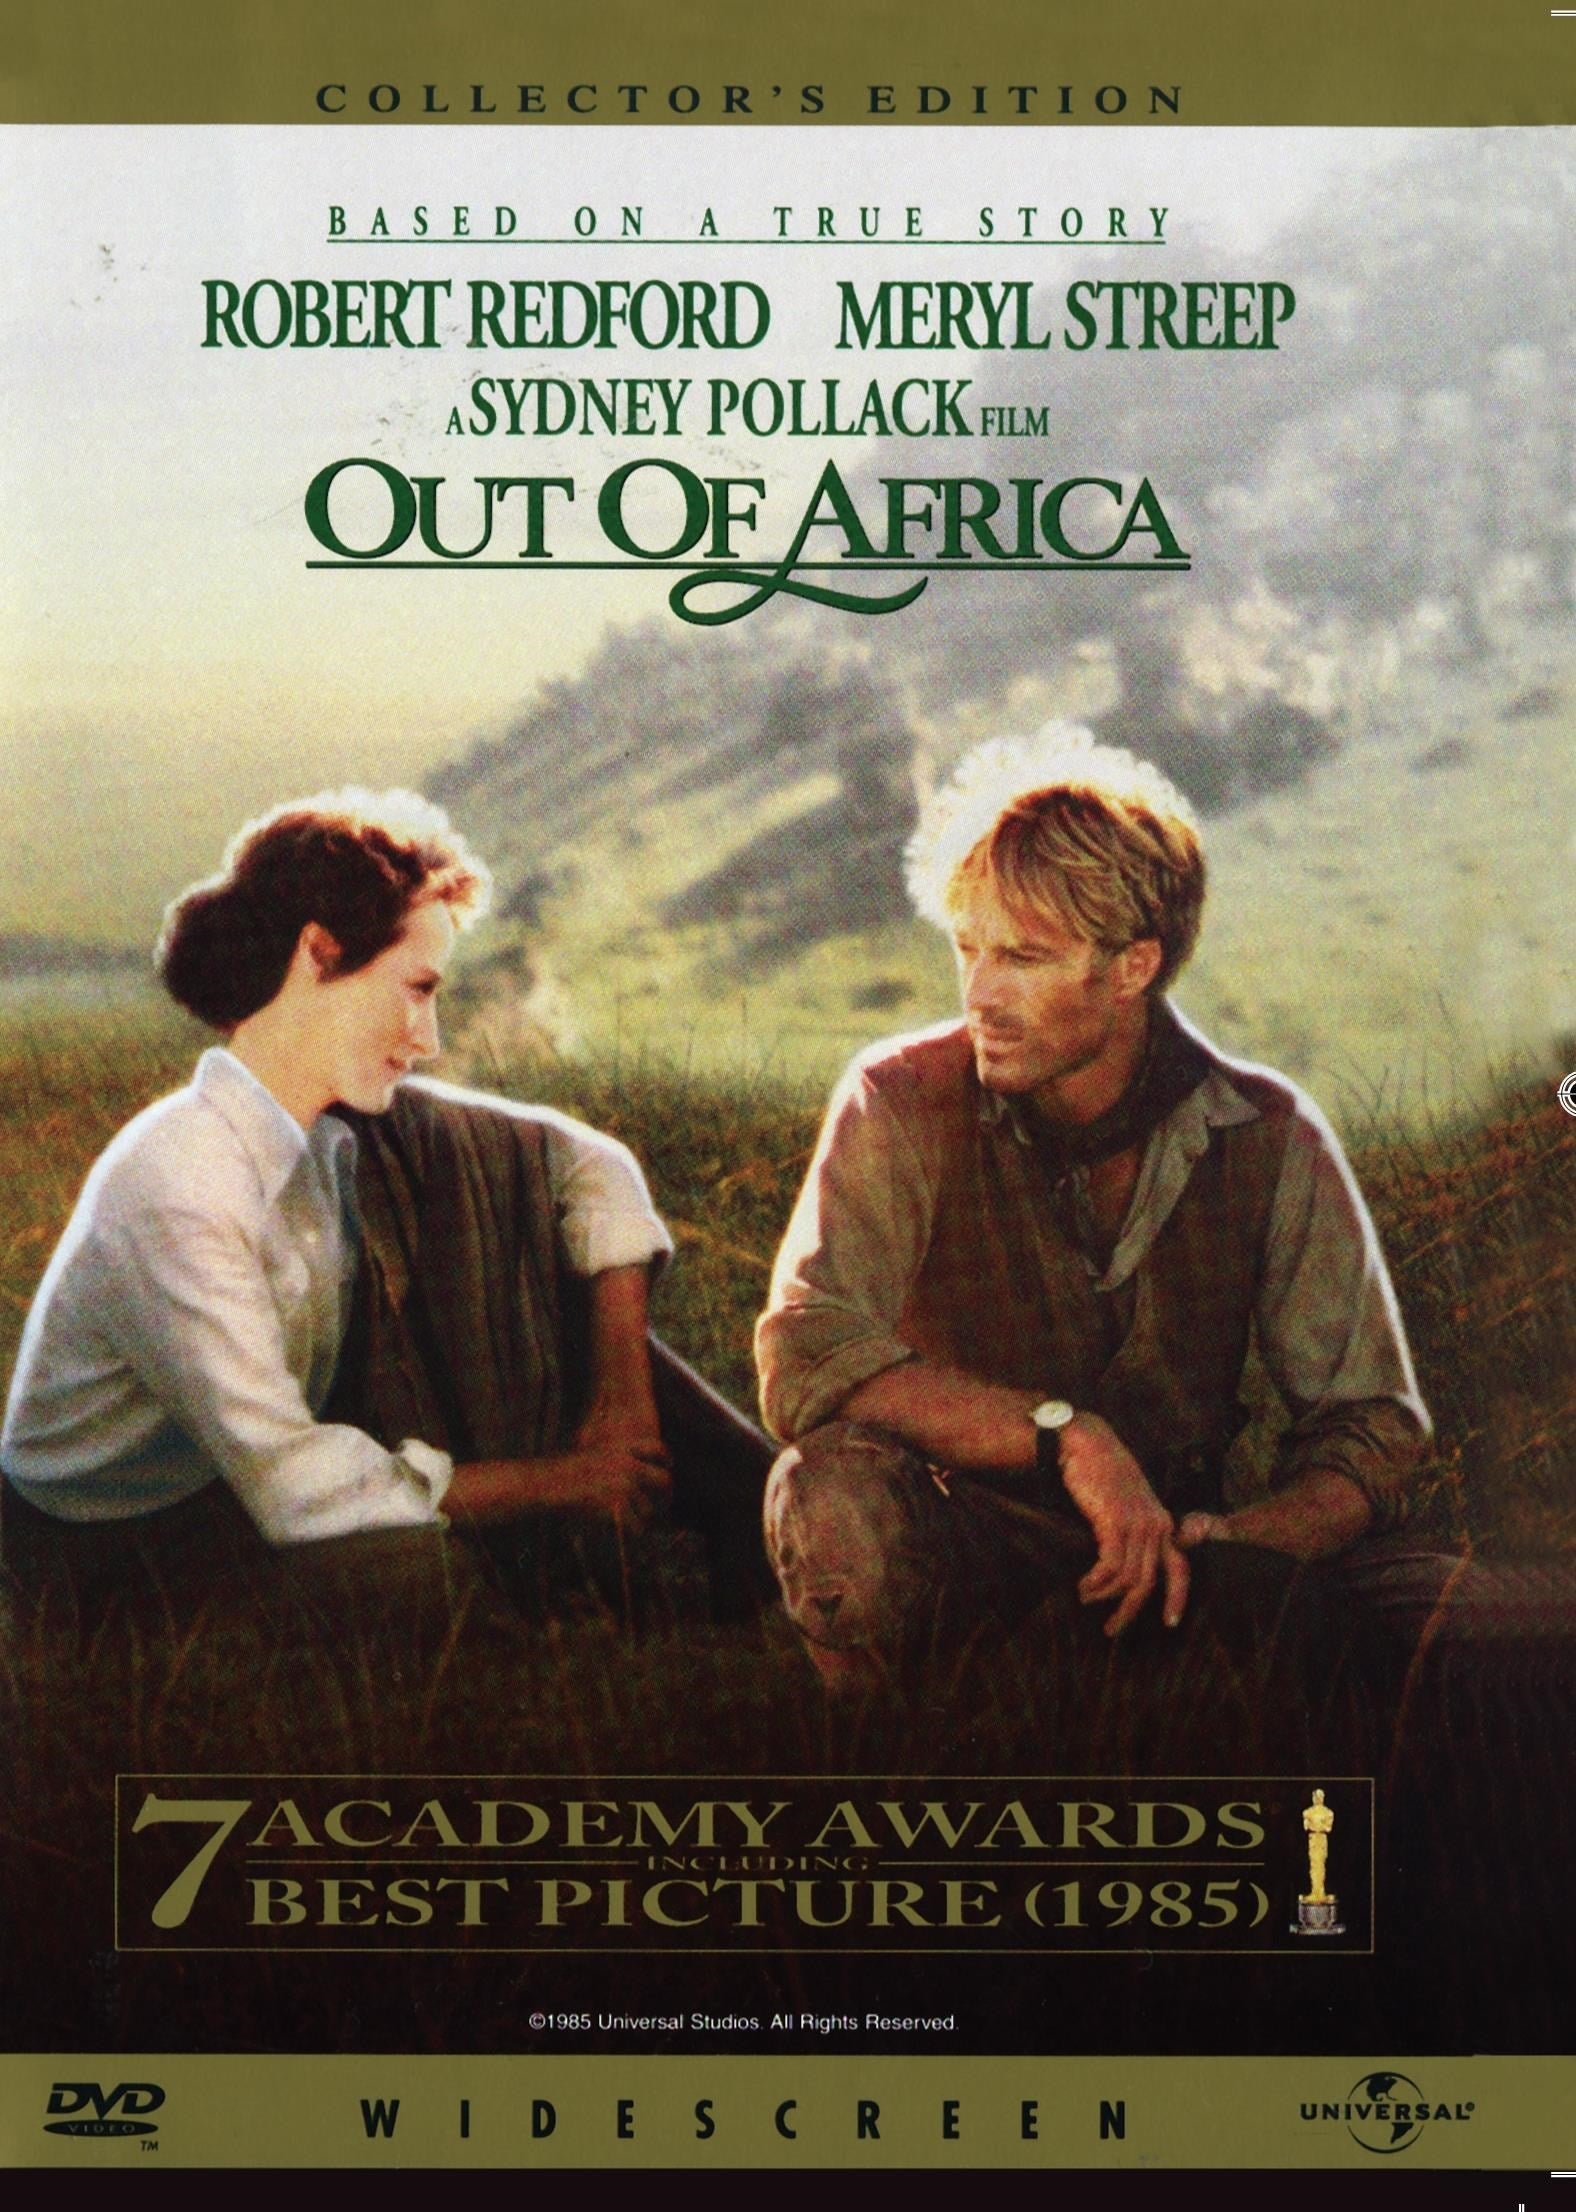 Out of Africa rareandcollectibledvds